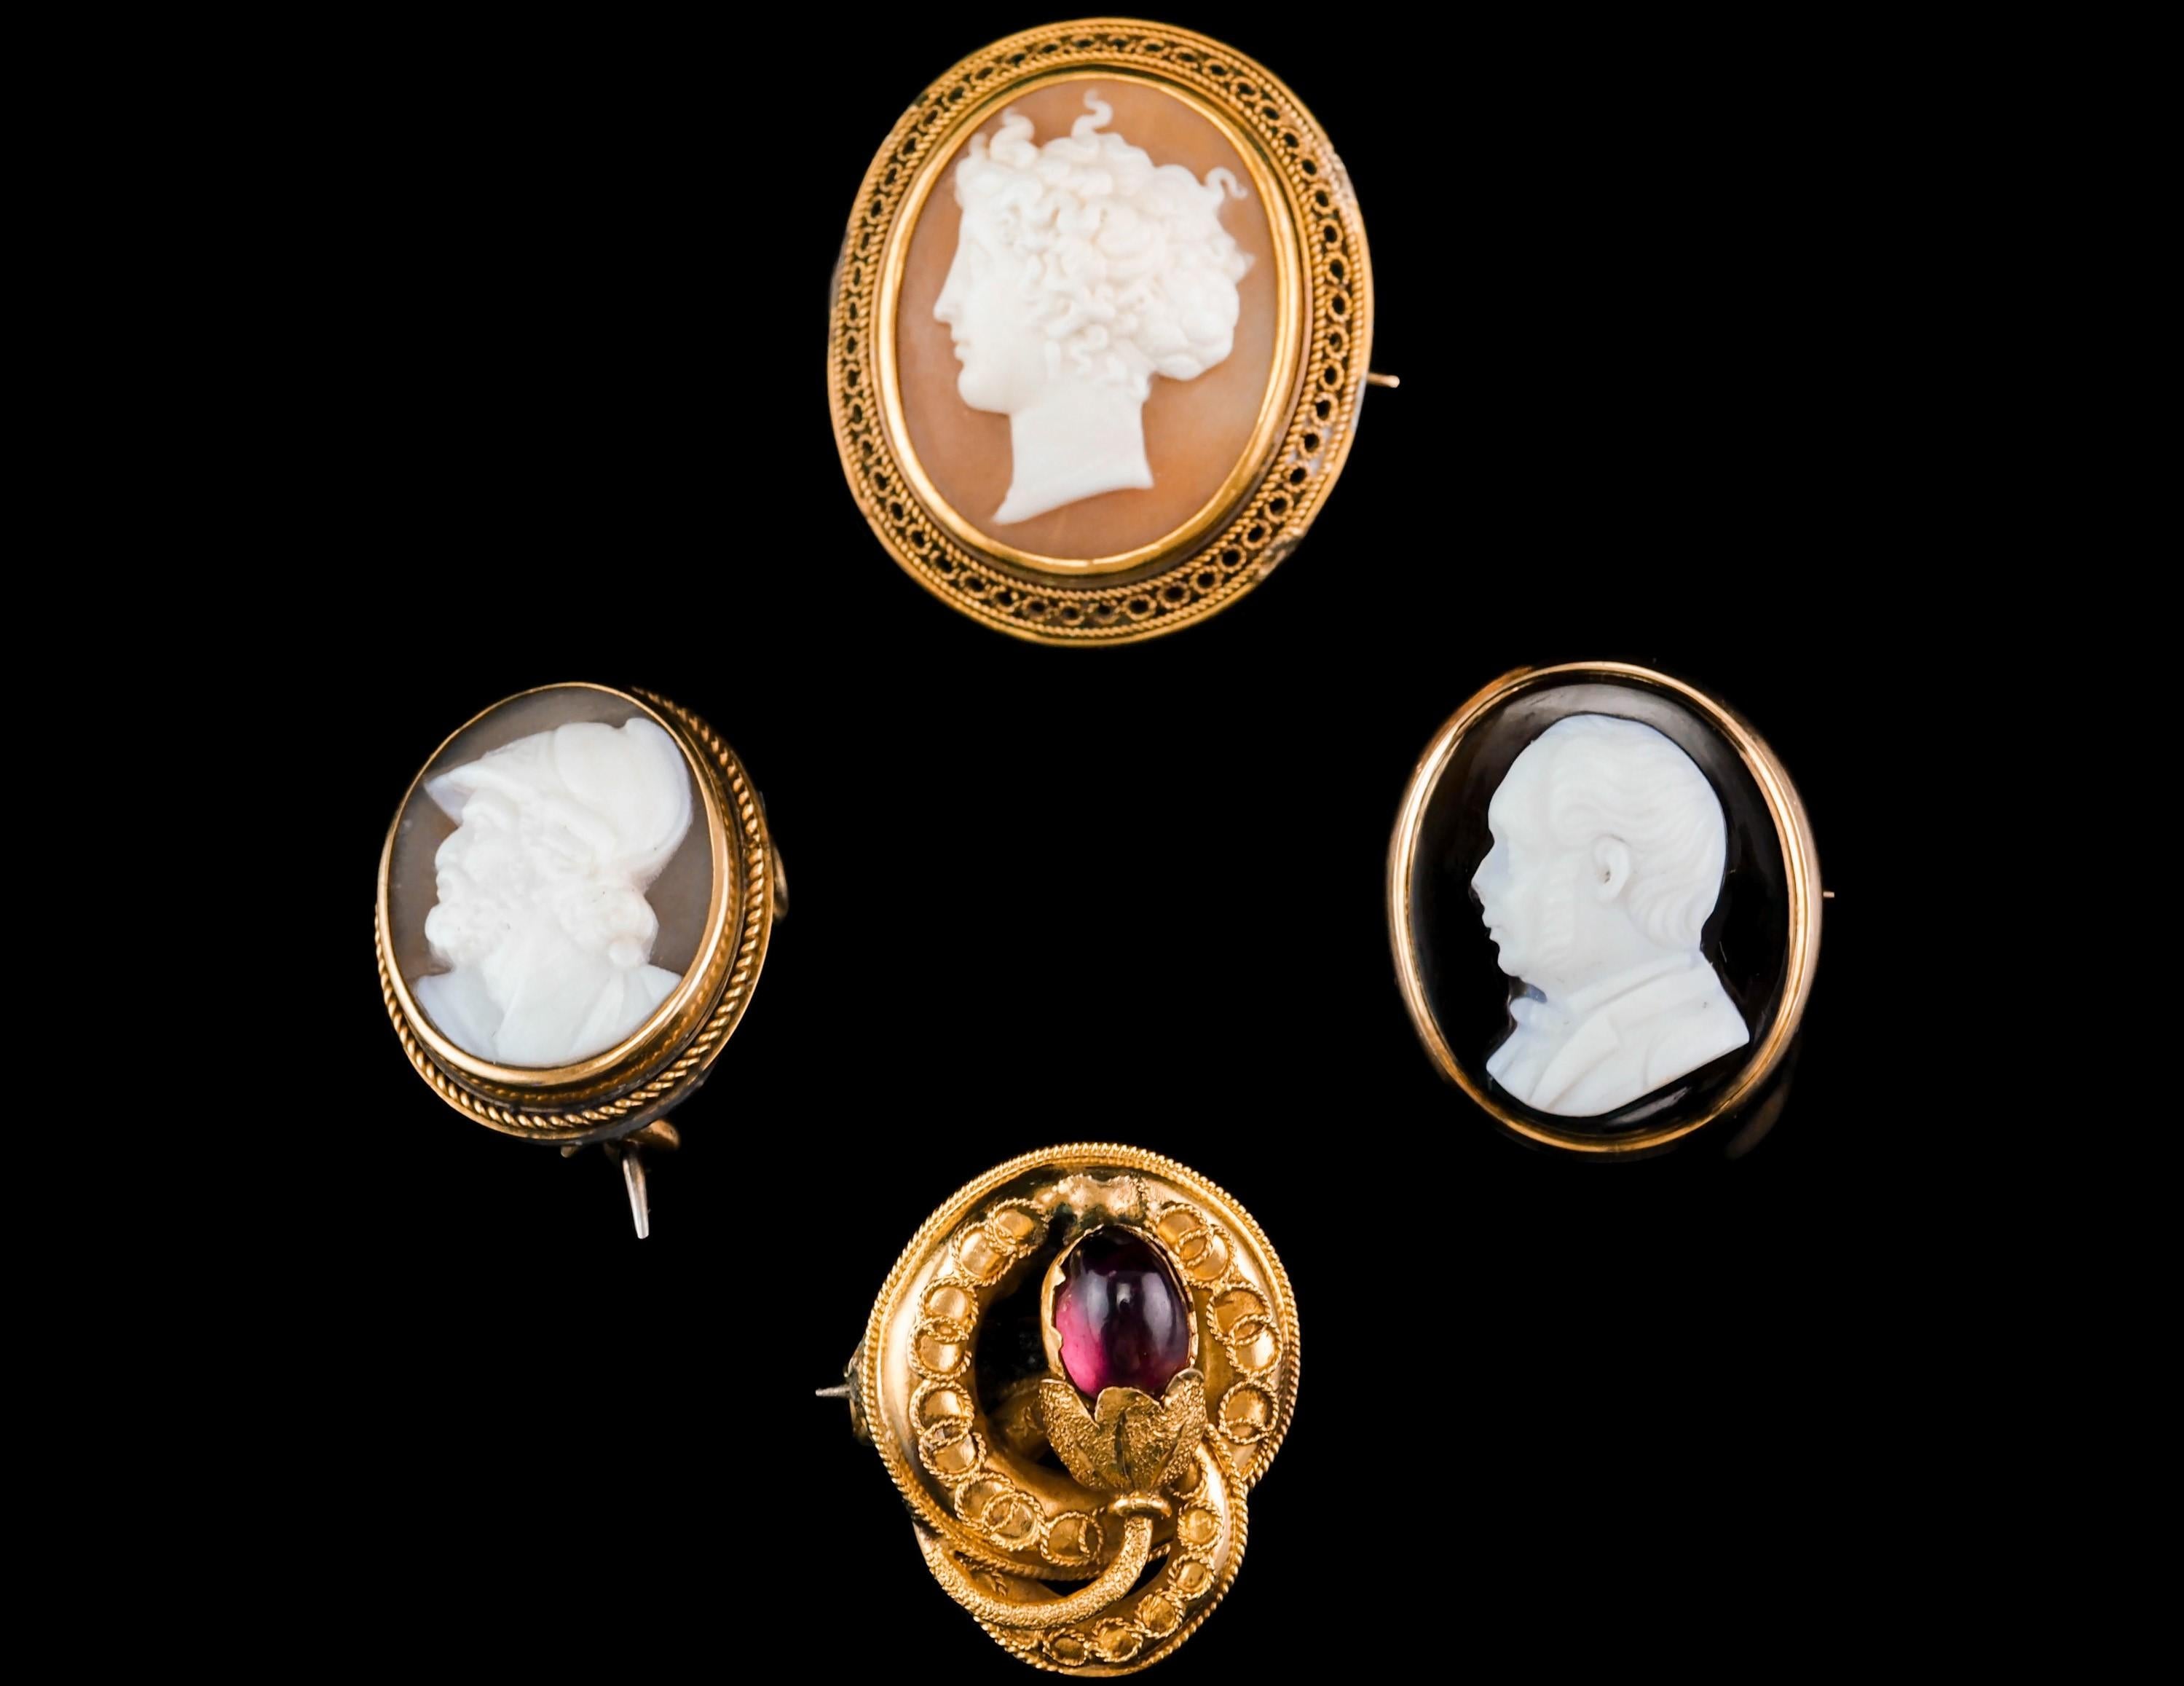 Antique Victorian 15ct Gold Carved Shell Cameo with Figural Lady Head - c.1890 For Sale 7